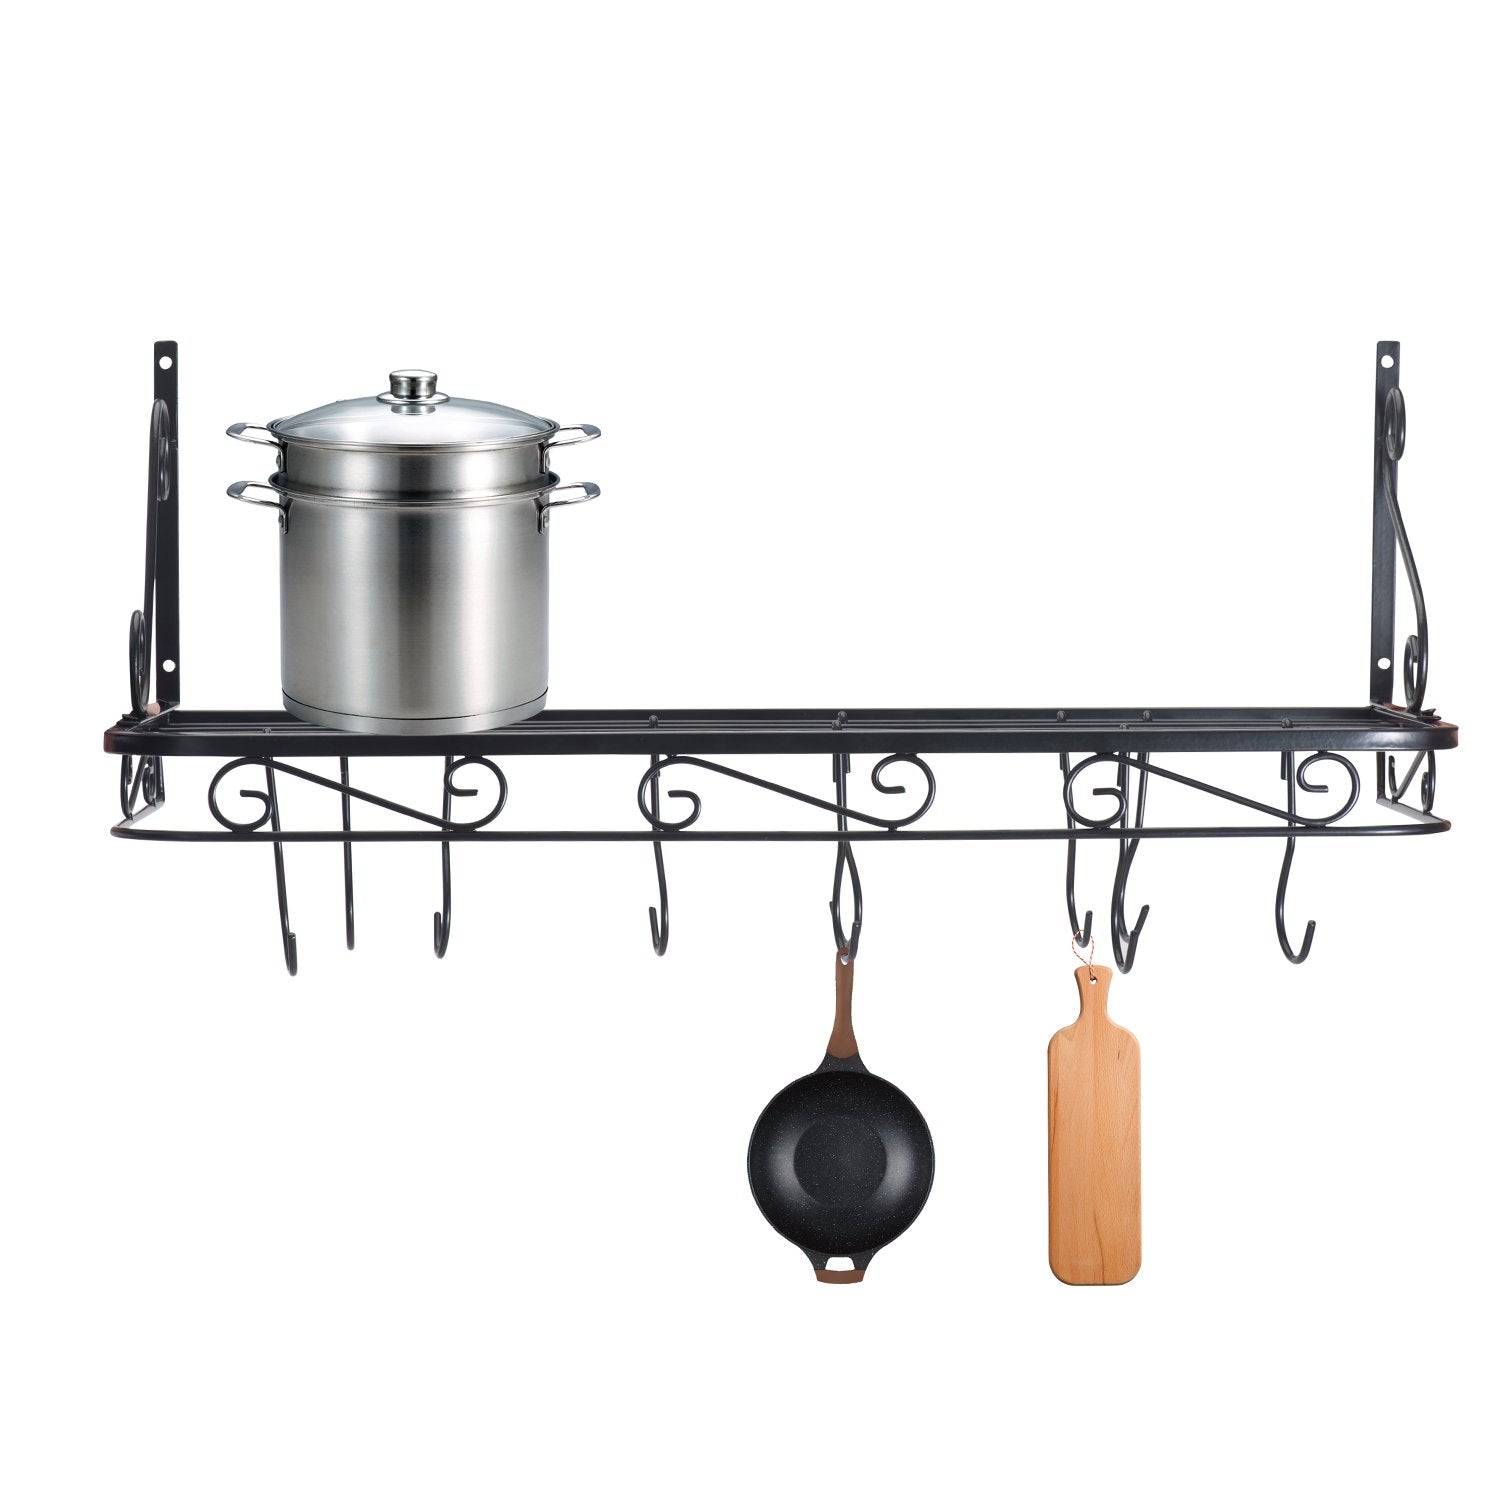 Wall Mounted or Hanging Pots and Pans Rack. Pot Holders Wall Shelves with 12 Hooks. Kitchen Shelves Wall Mounted with Wall Hooks. Kitchen Storage Pot Holder Pot Rack. Pot Pan Organizer. Pot Pa